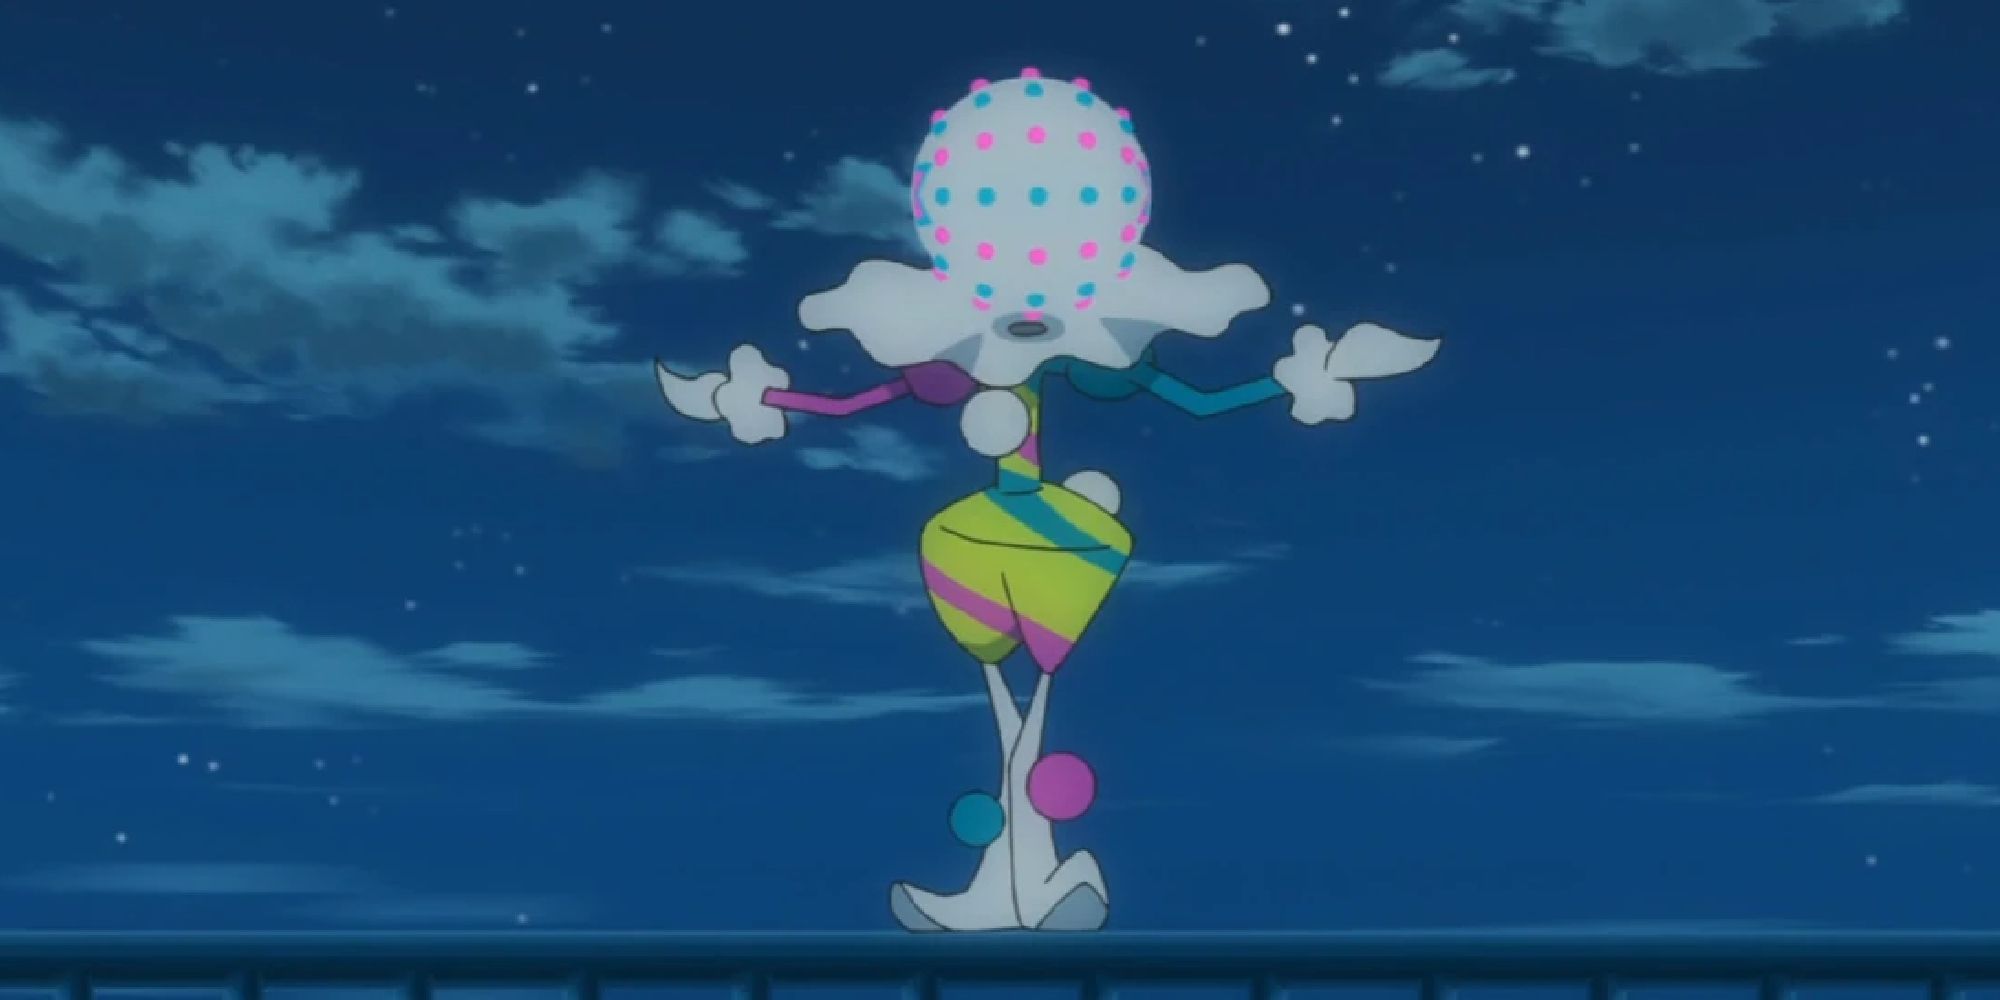 Blacephalon appearing in the Pokemon anime